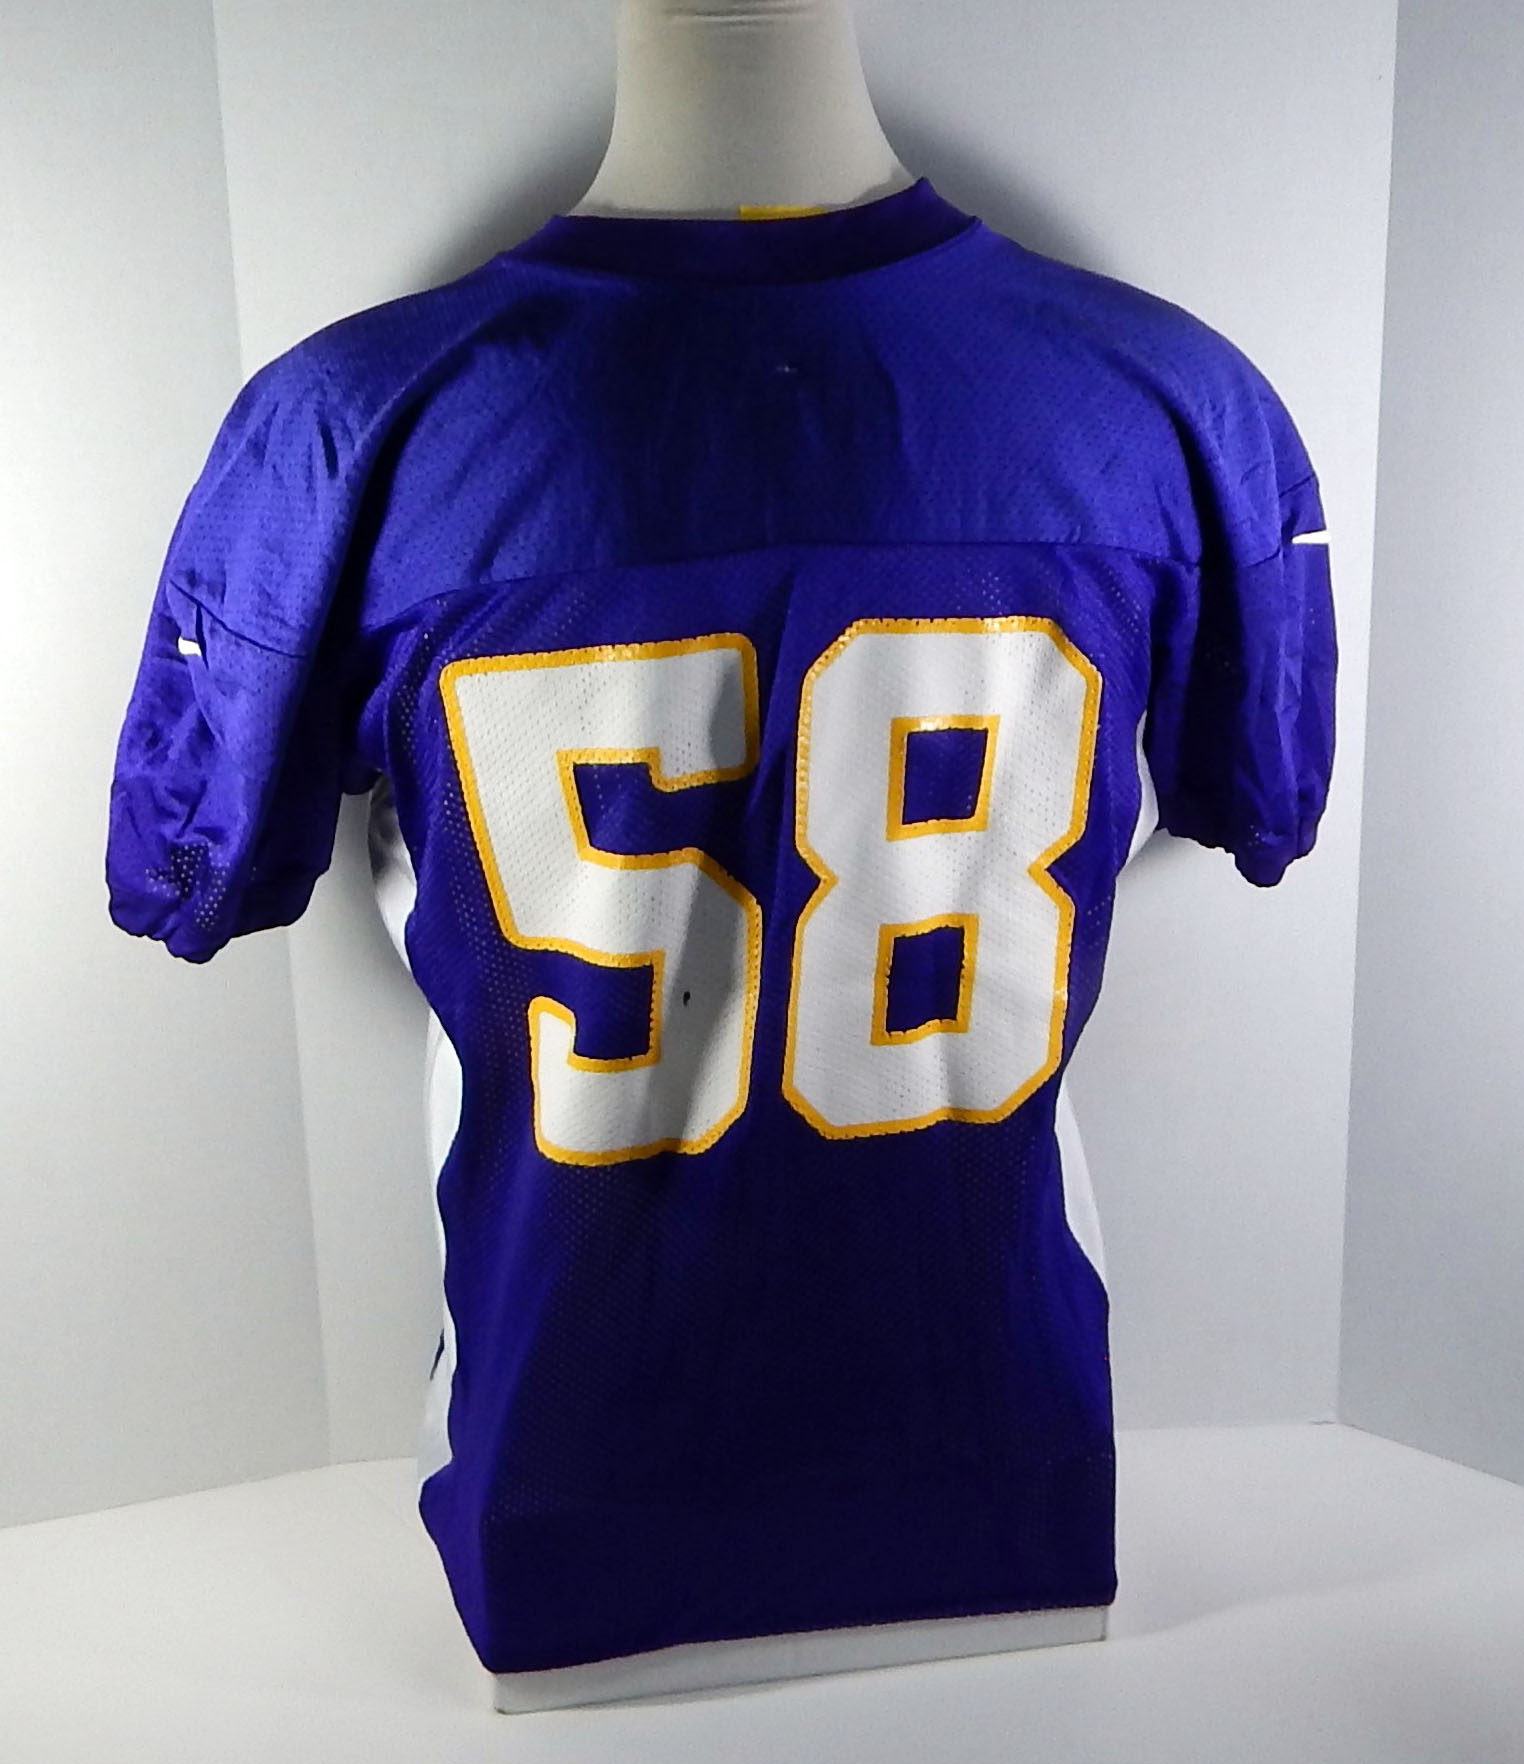 Details about Minnesota Vikings #58 Game Issued Purple Practice Jersey